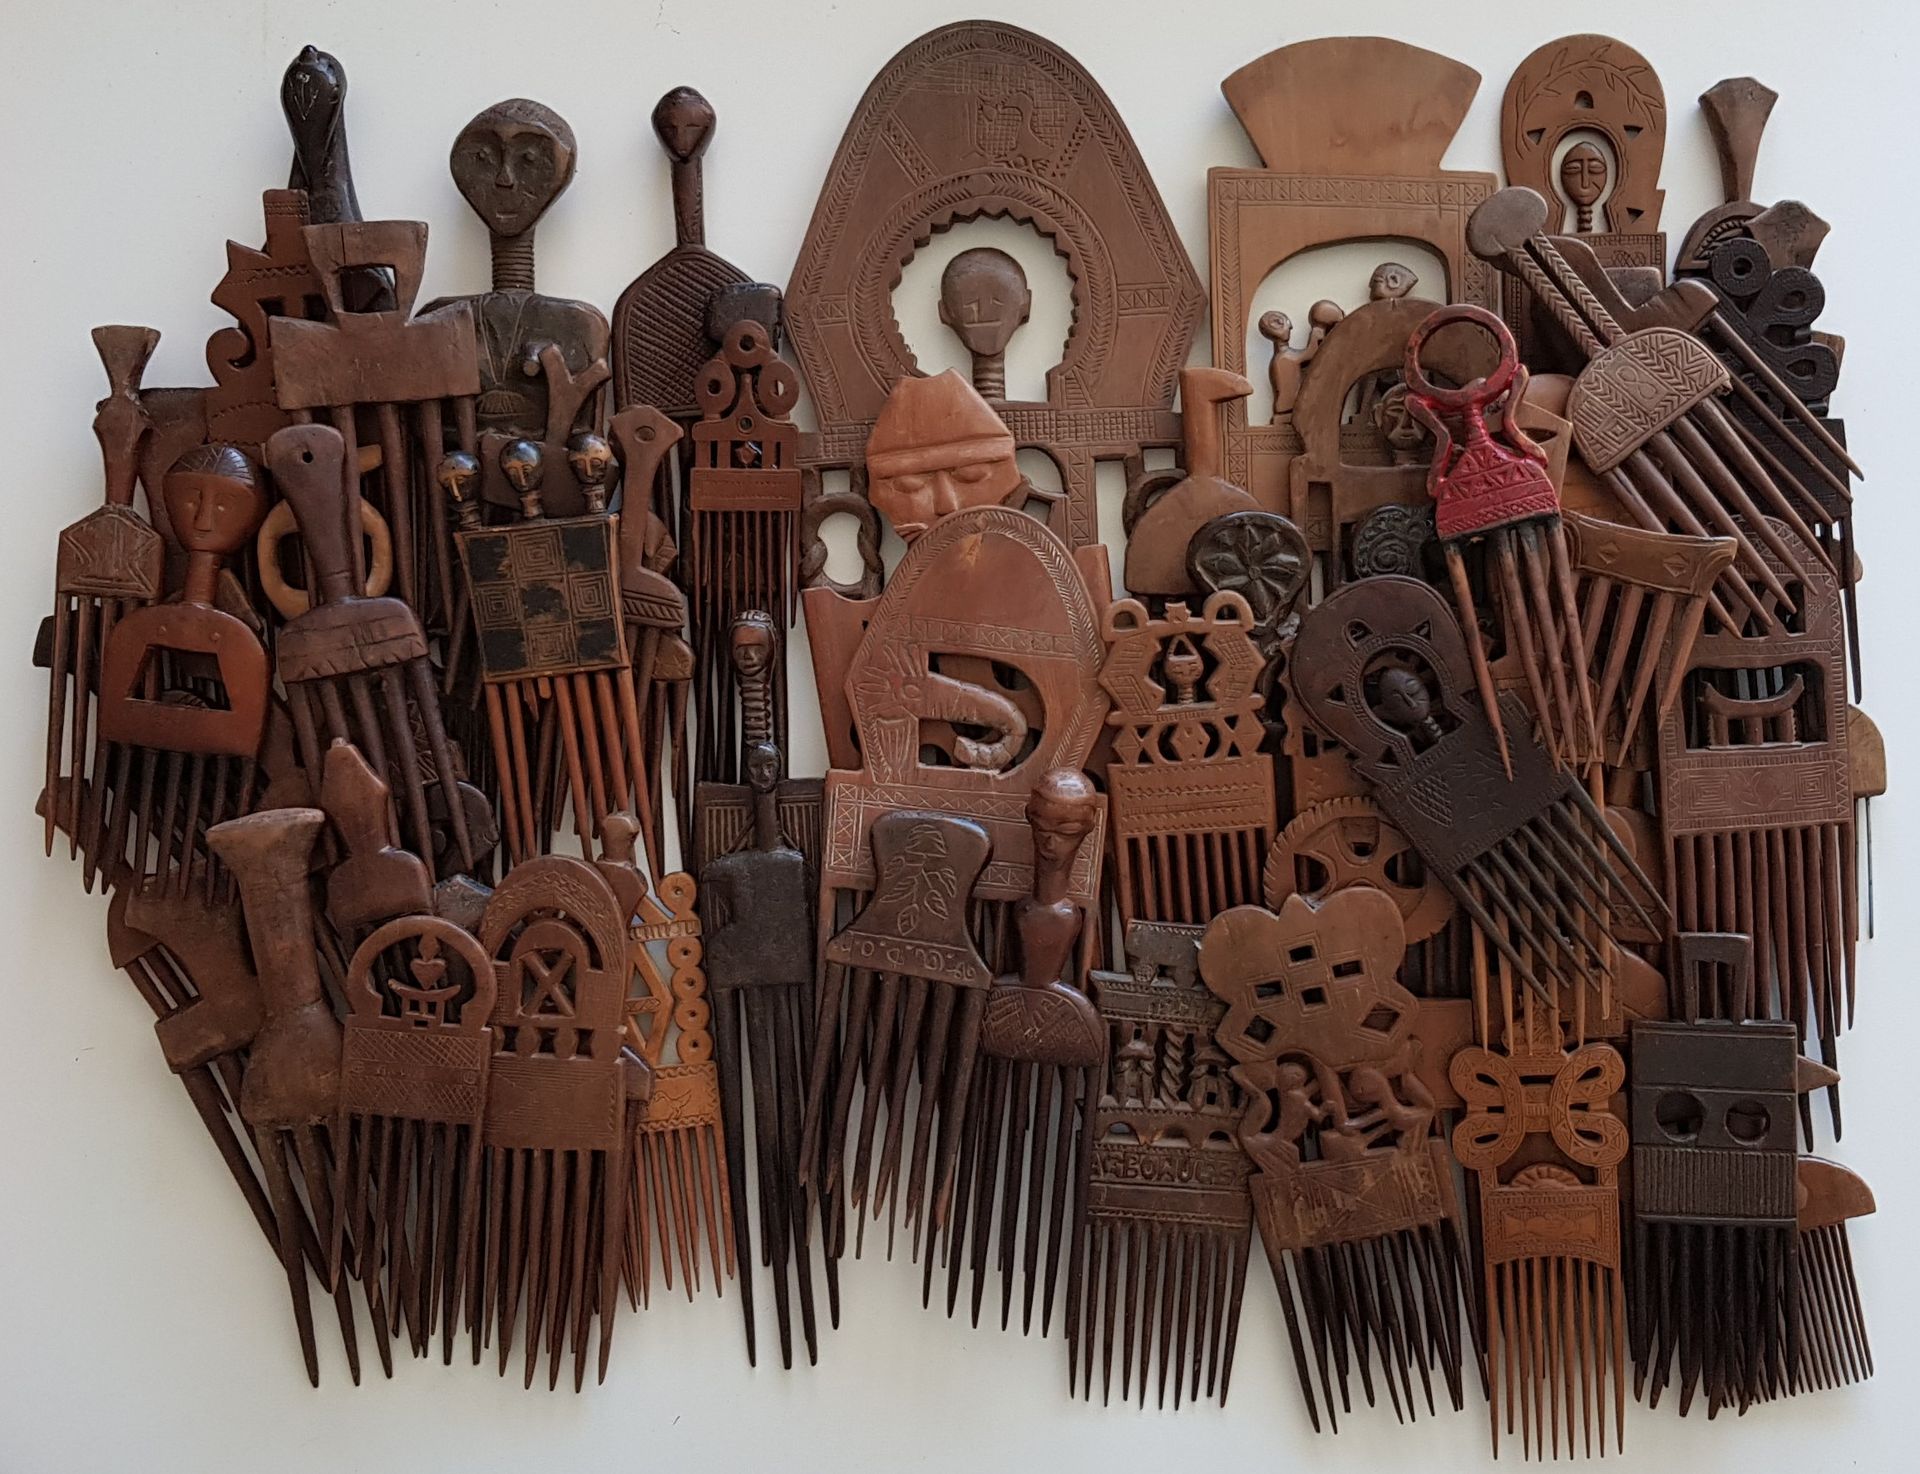 Collection de peignes Ashanti et divers 
Collection of Ashanti combs and miscell&hellip;